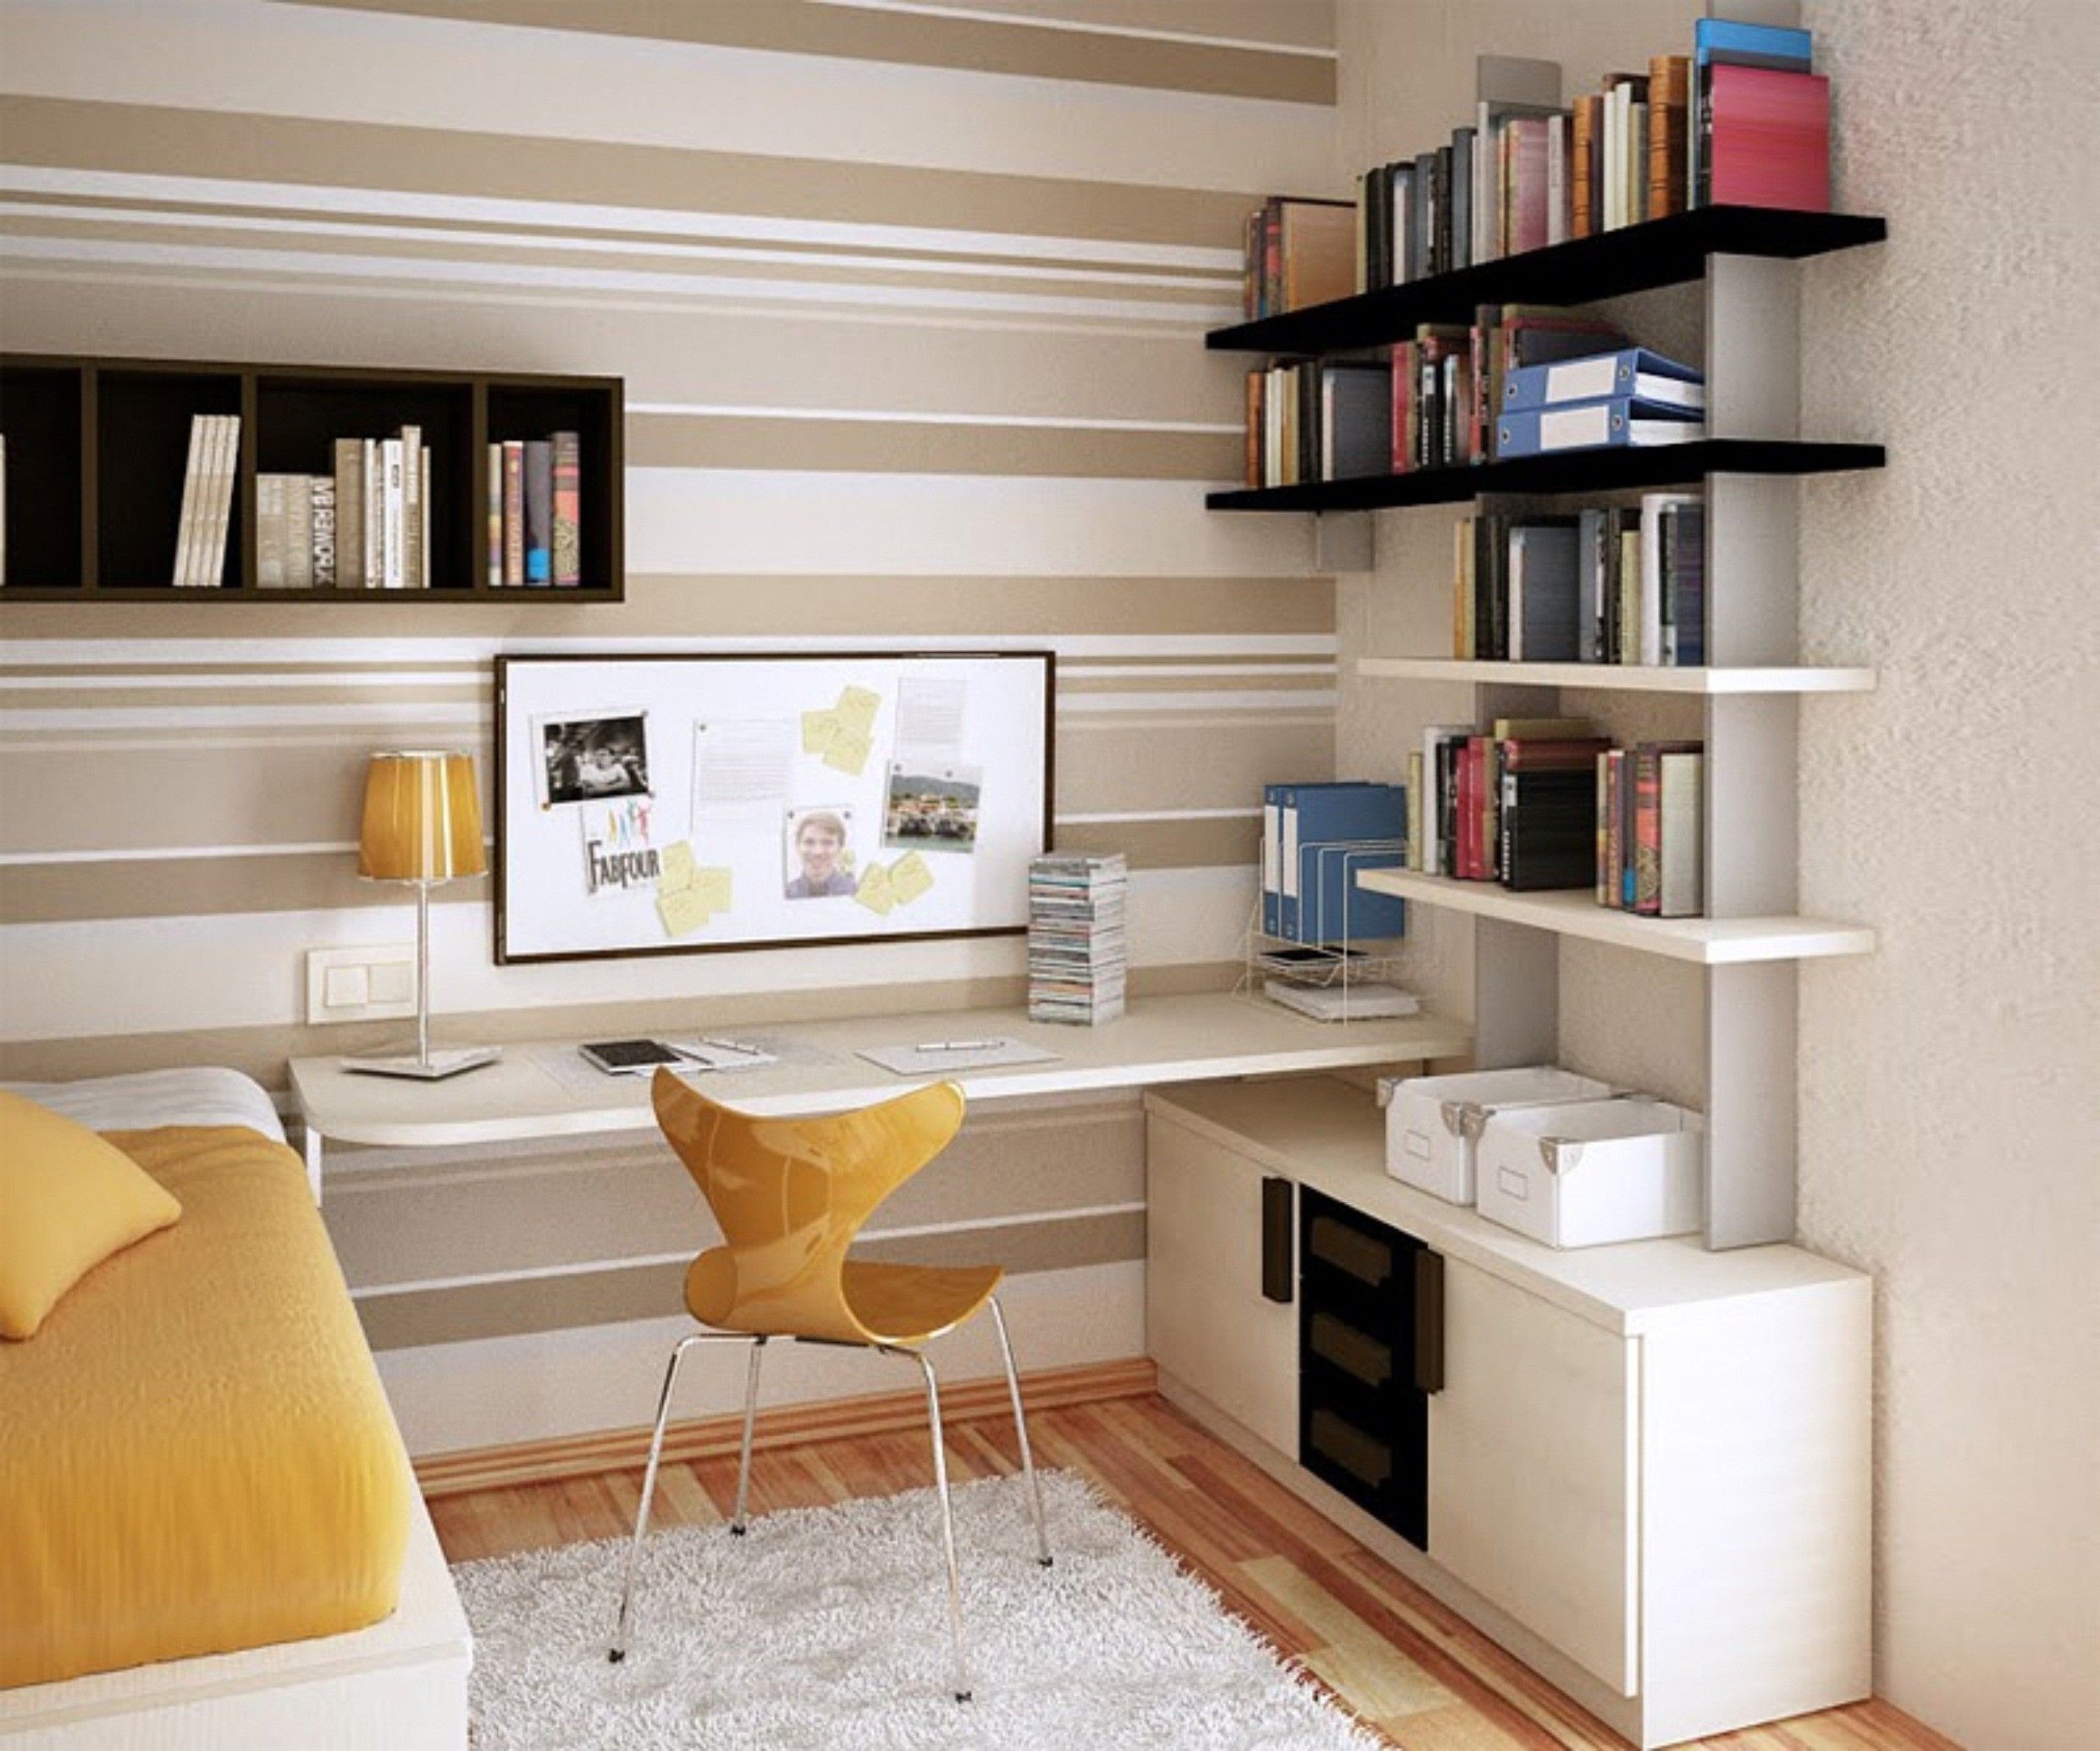 White Polished Solid Wood Floating Study Desk Integrated With For Study Desk With Bookshelf (View 6 of 15)